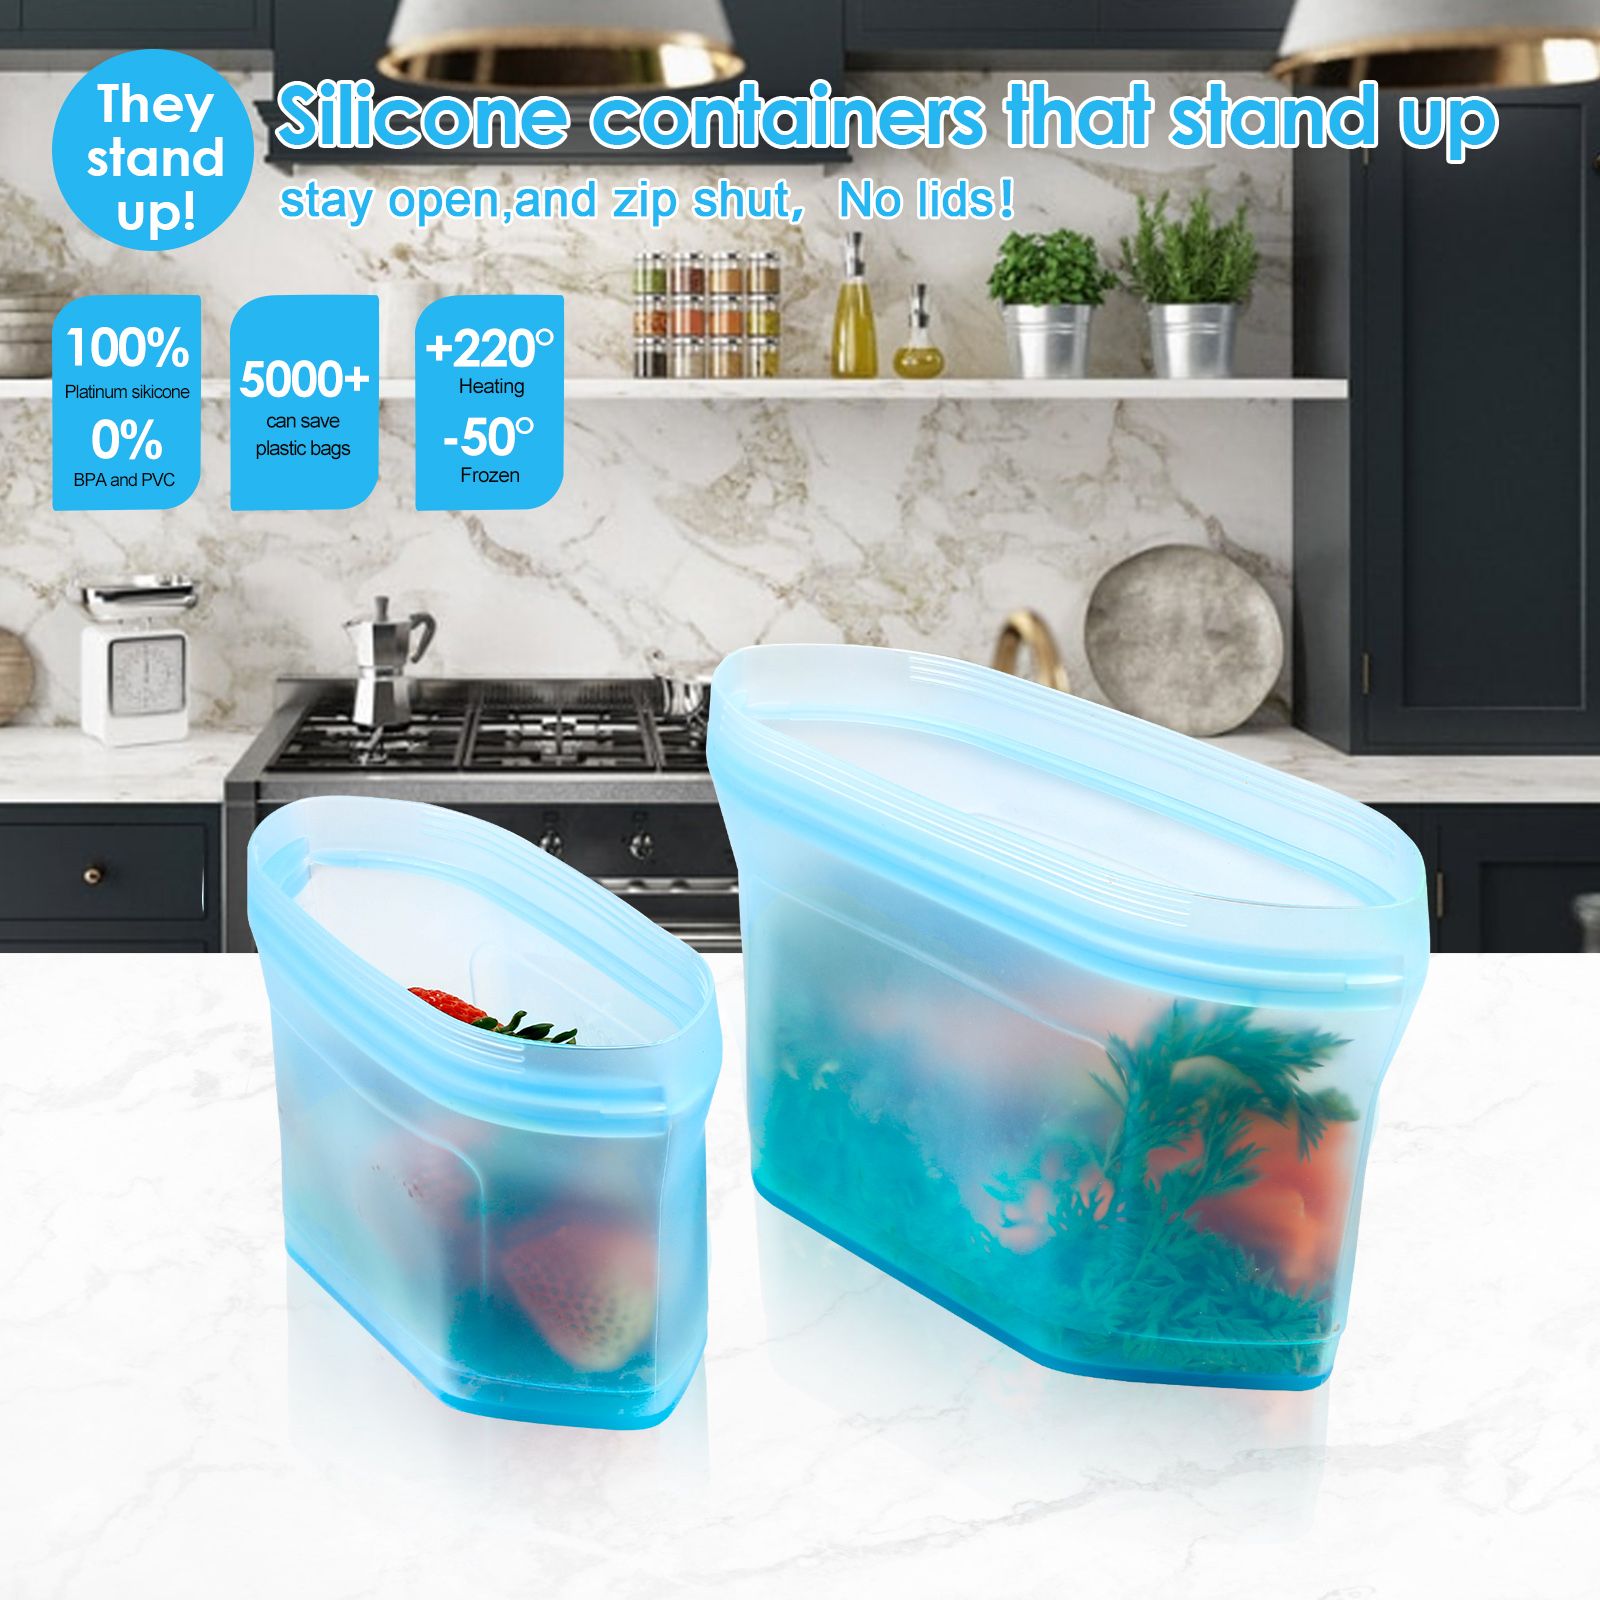 Better Homes & Gardens Silicone Sandwich Food Storage Bag- Teal, Durable,  Leakproof, Reusable